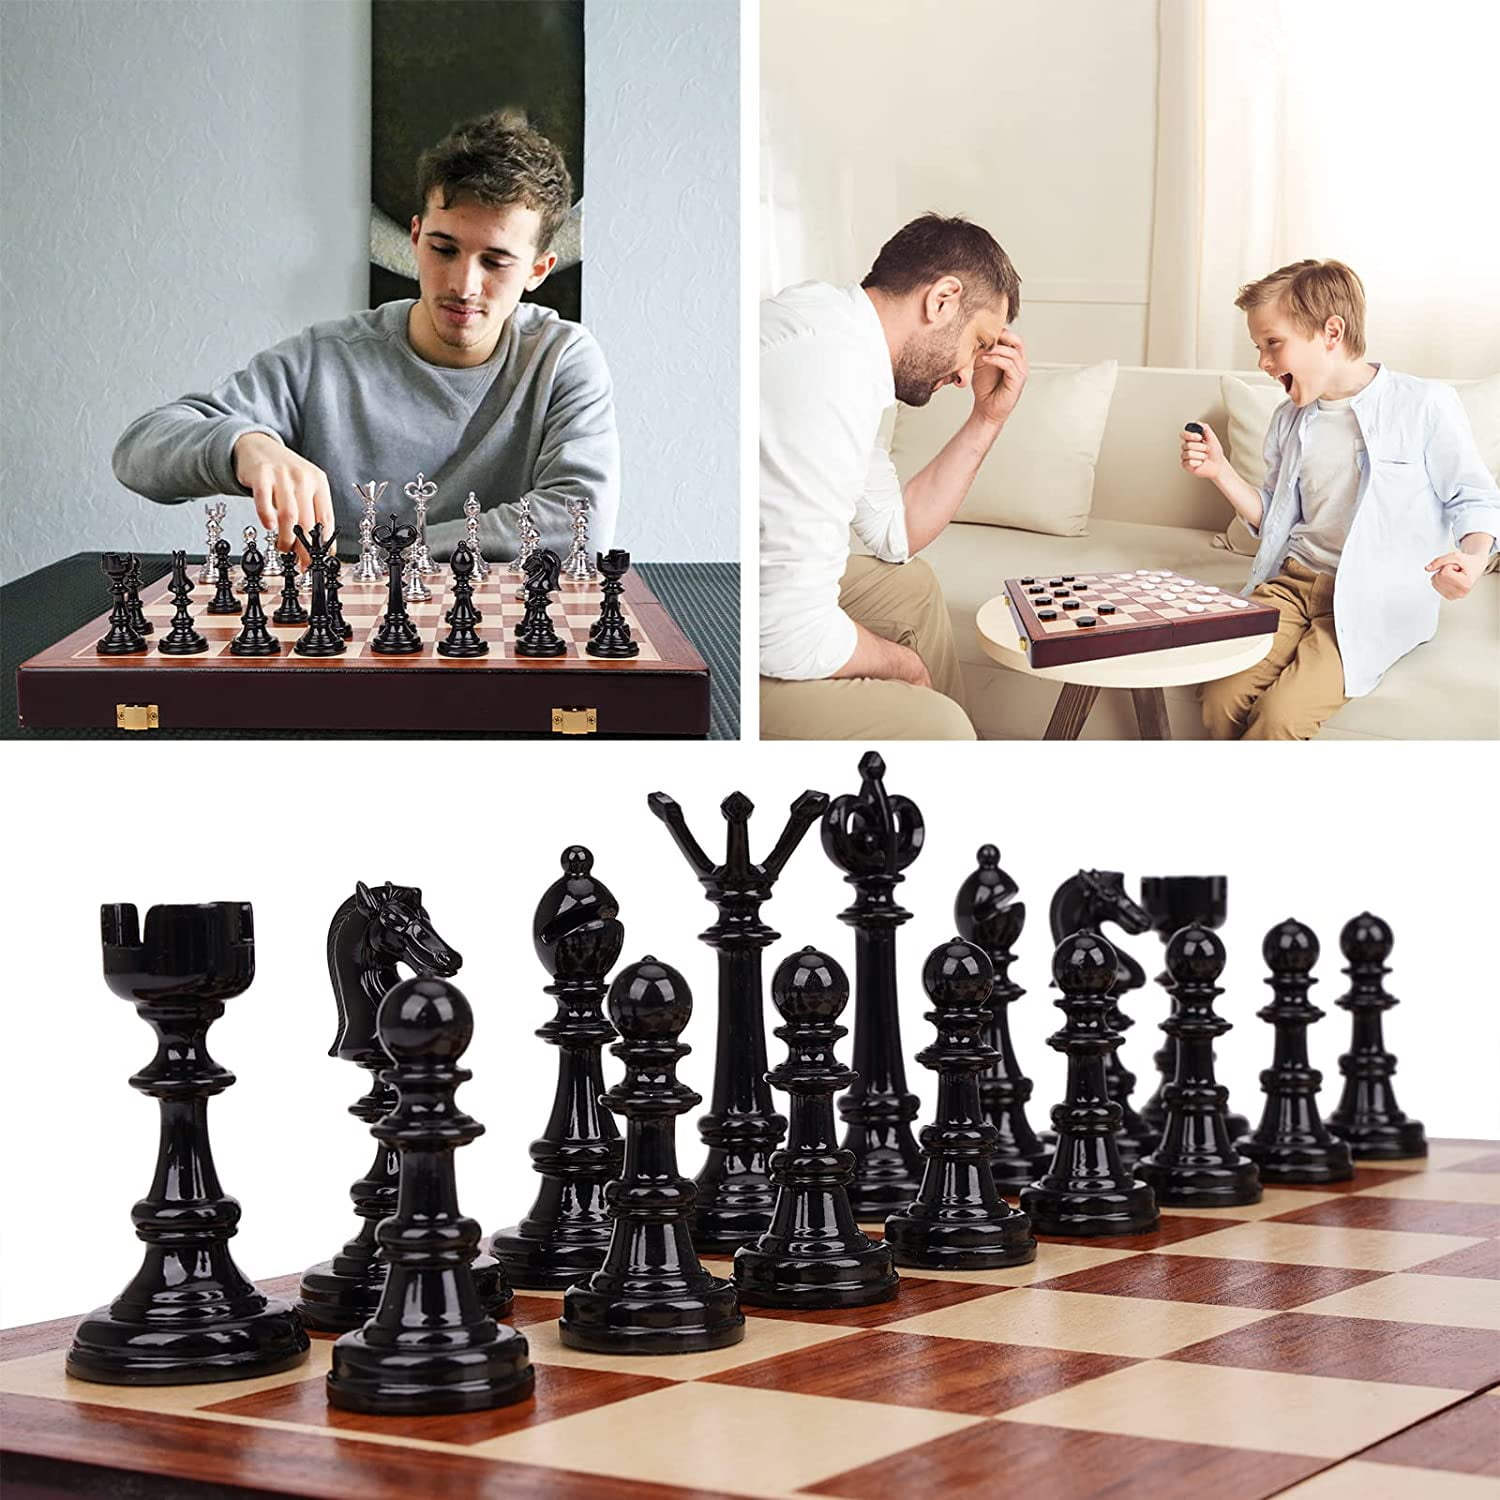 VAMSLOVE Chess and Checkers Board Game Sets for Adults Wooden Deluxe 15  inch Wood Board Box with Storage, Classic 2 in 1 Large Size with Chess  Pieces